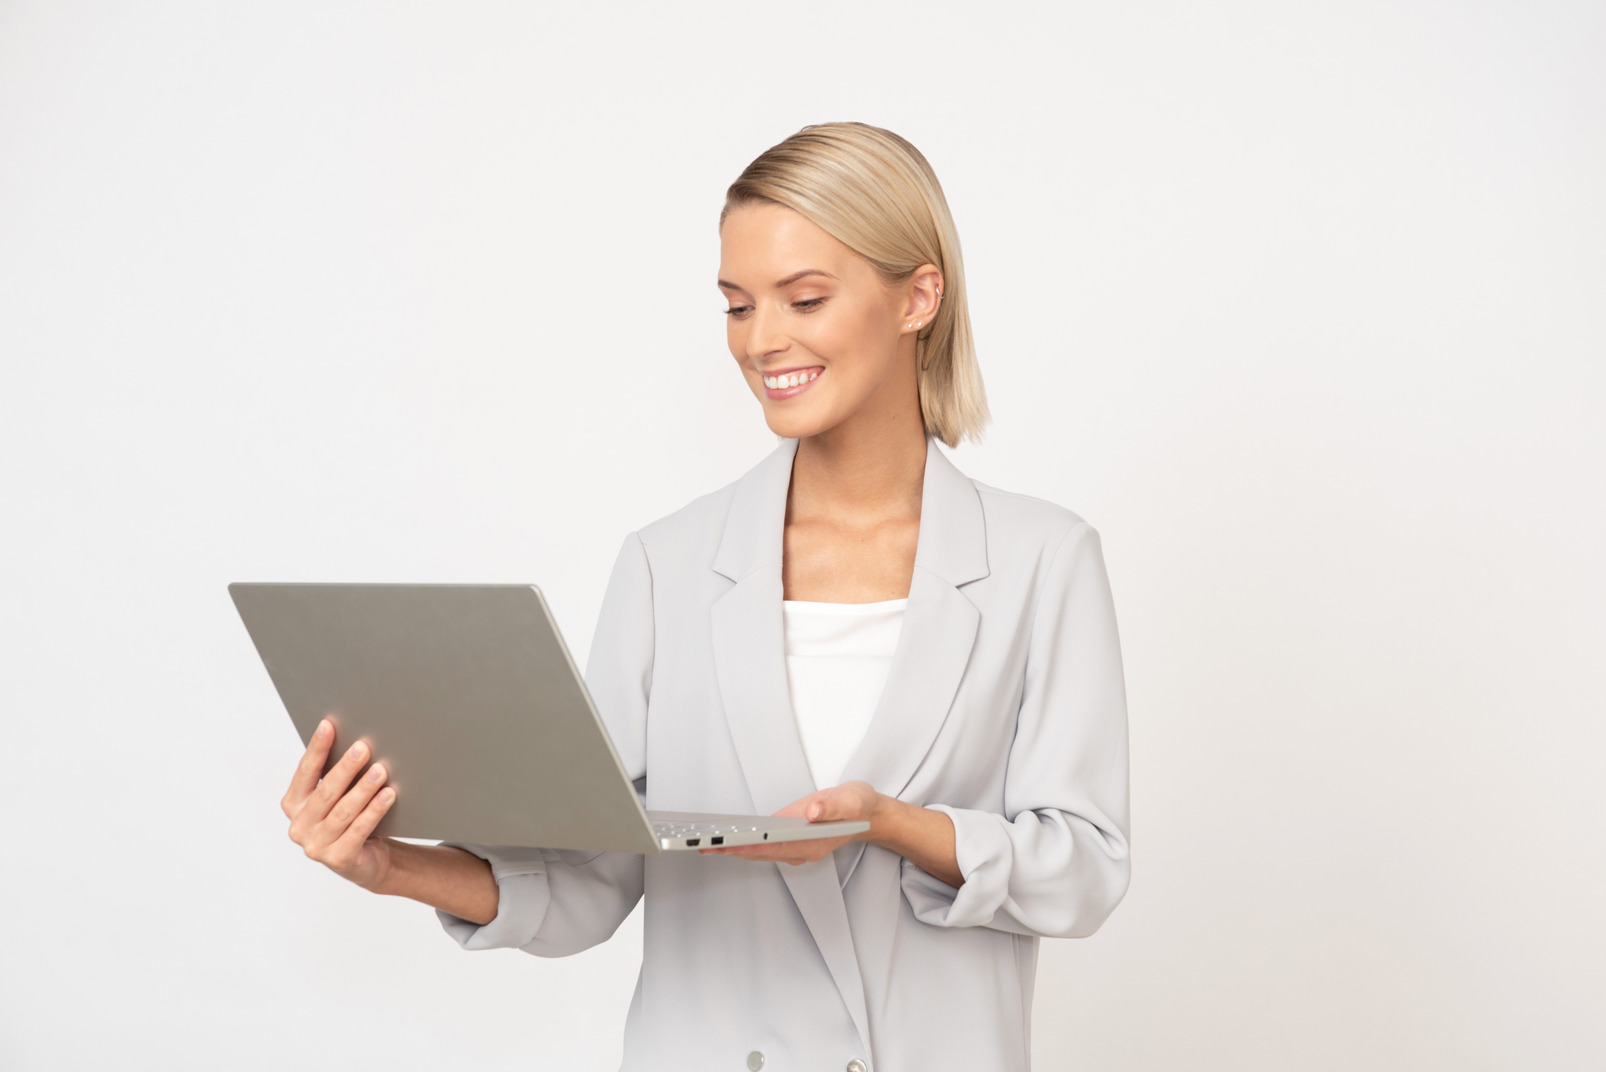 Young business woman with a laptop